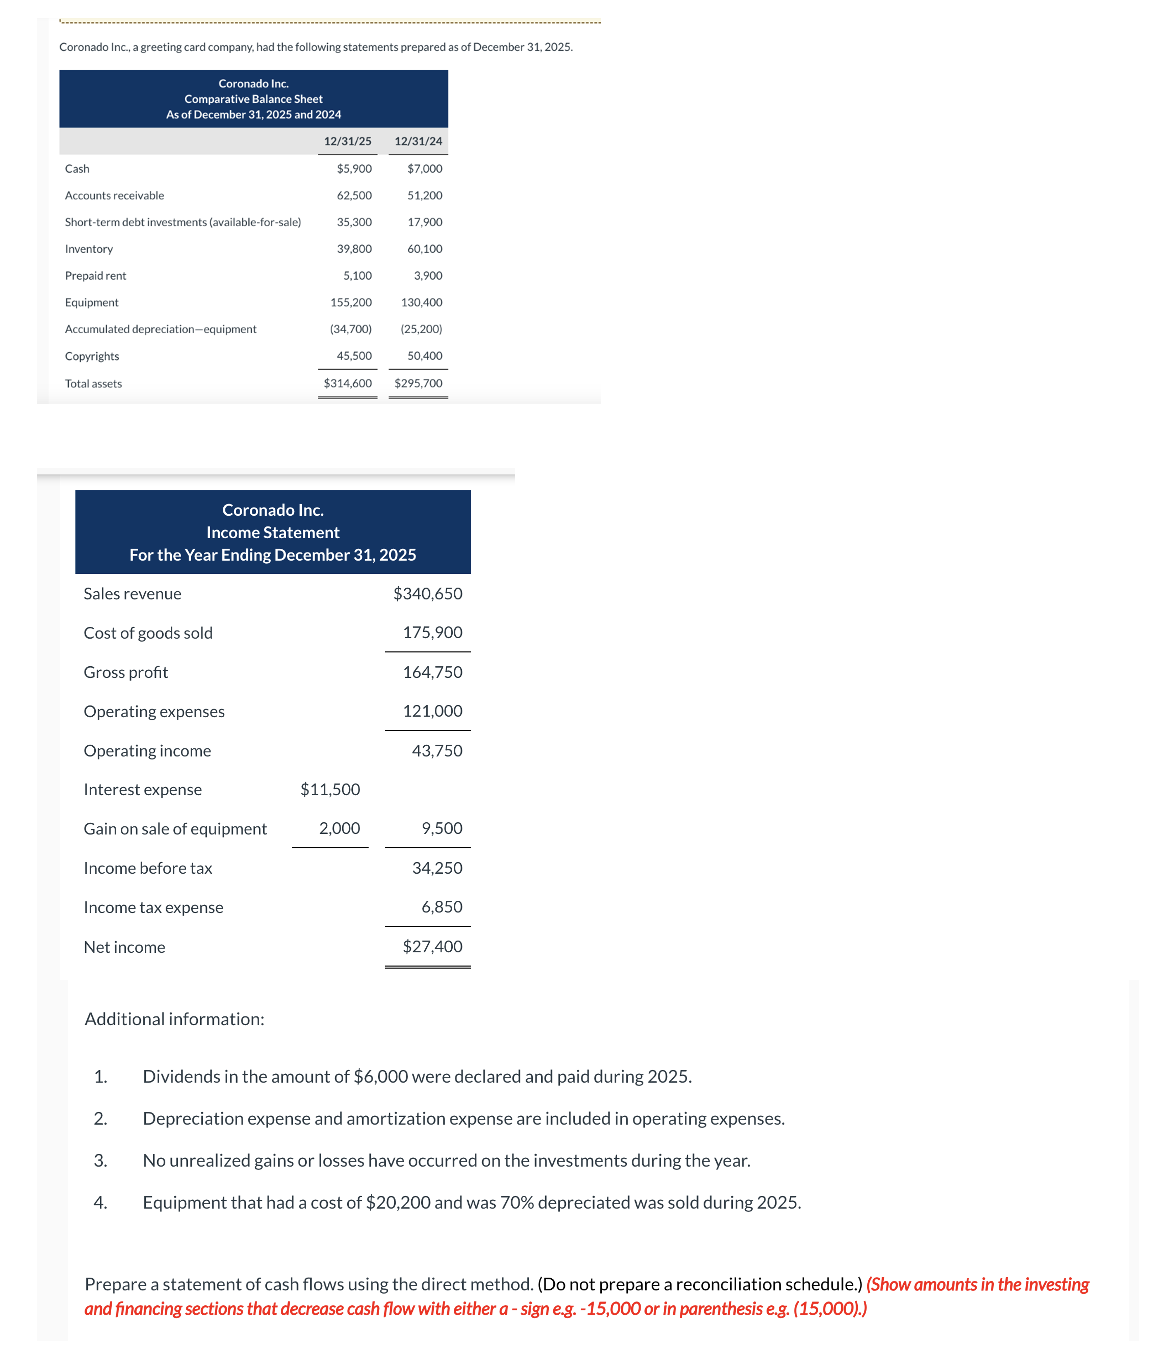 Coronado Inc., a greeting card company, had the following statements prepared as of December 31, 2025.
Coronado Inc.
Comparative Balance Sheet
As of December 31, 2025 and 2024
12/31/25
12/31/24
Cash
$5,900
$7,000
Accounts receivable
62,500
51,200
Short-term debt investments (available-for-sale)
35,300
17,900
Inventory
39,800
60,100
Prepaid rent
5.100
3,900
Equipment
155,200
130,400
Accumulated depreciation-equipment
(34,700)
(25,200)
Copyrights
45,500
50,400
Total assets
$314,600
$295,700
Coronado Inc.
Income Statement
For the Year Ending December 31, 2025
Sales revenue
Cost of goods sold
$340,650
175,900
Gross profit
Operating expenses
164,750
121.000
Operating income
43,750
Interest expense
$11,500
Gain on sale of equipment
2,000
9,500
Income before tax
34,250
Income tax expense
6,850
Net income
$27,400
Additional information:
1.
Dividends in the amount of $6,000 were declared and paid during 2025.
2.
3.
Depreciation expense and amortization expense are included in operating expenses.
No unrealized gains or losses have occurred on the investments during the year.
4.
Equipment that had a cost of $20,200 and was 70% depreciated was sold during 2025.
Prepare a statement of cash flows using the direct method. (Do not prepare a reconciliation schedule.) (Show amounts in the investing
and financing sections that decrease cash flow with either a - sign e.g. -15,000 or in parenthesis e.g. (15,000).)